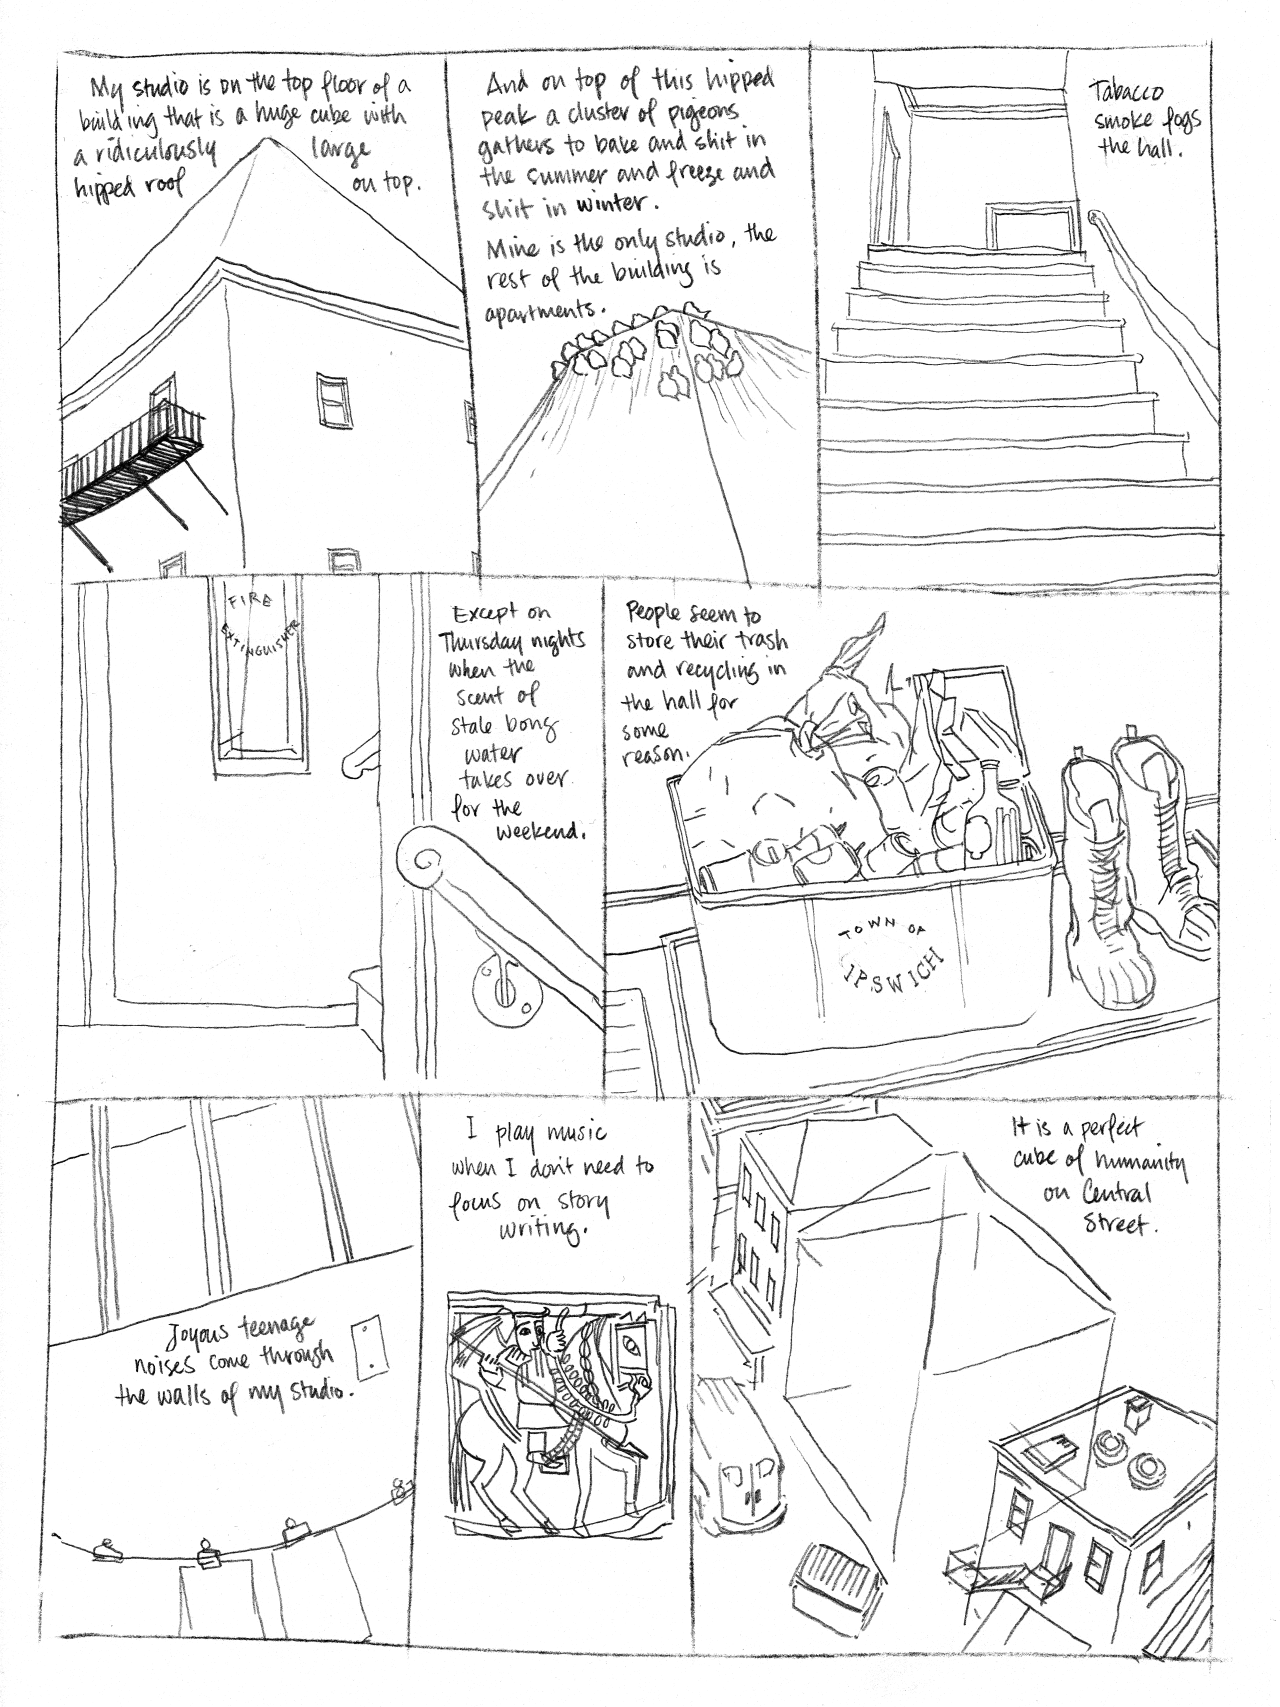 In Pieces: Someplace Which I Call Home (1/4) - Page 1